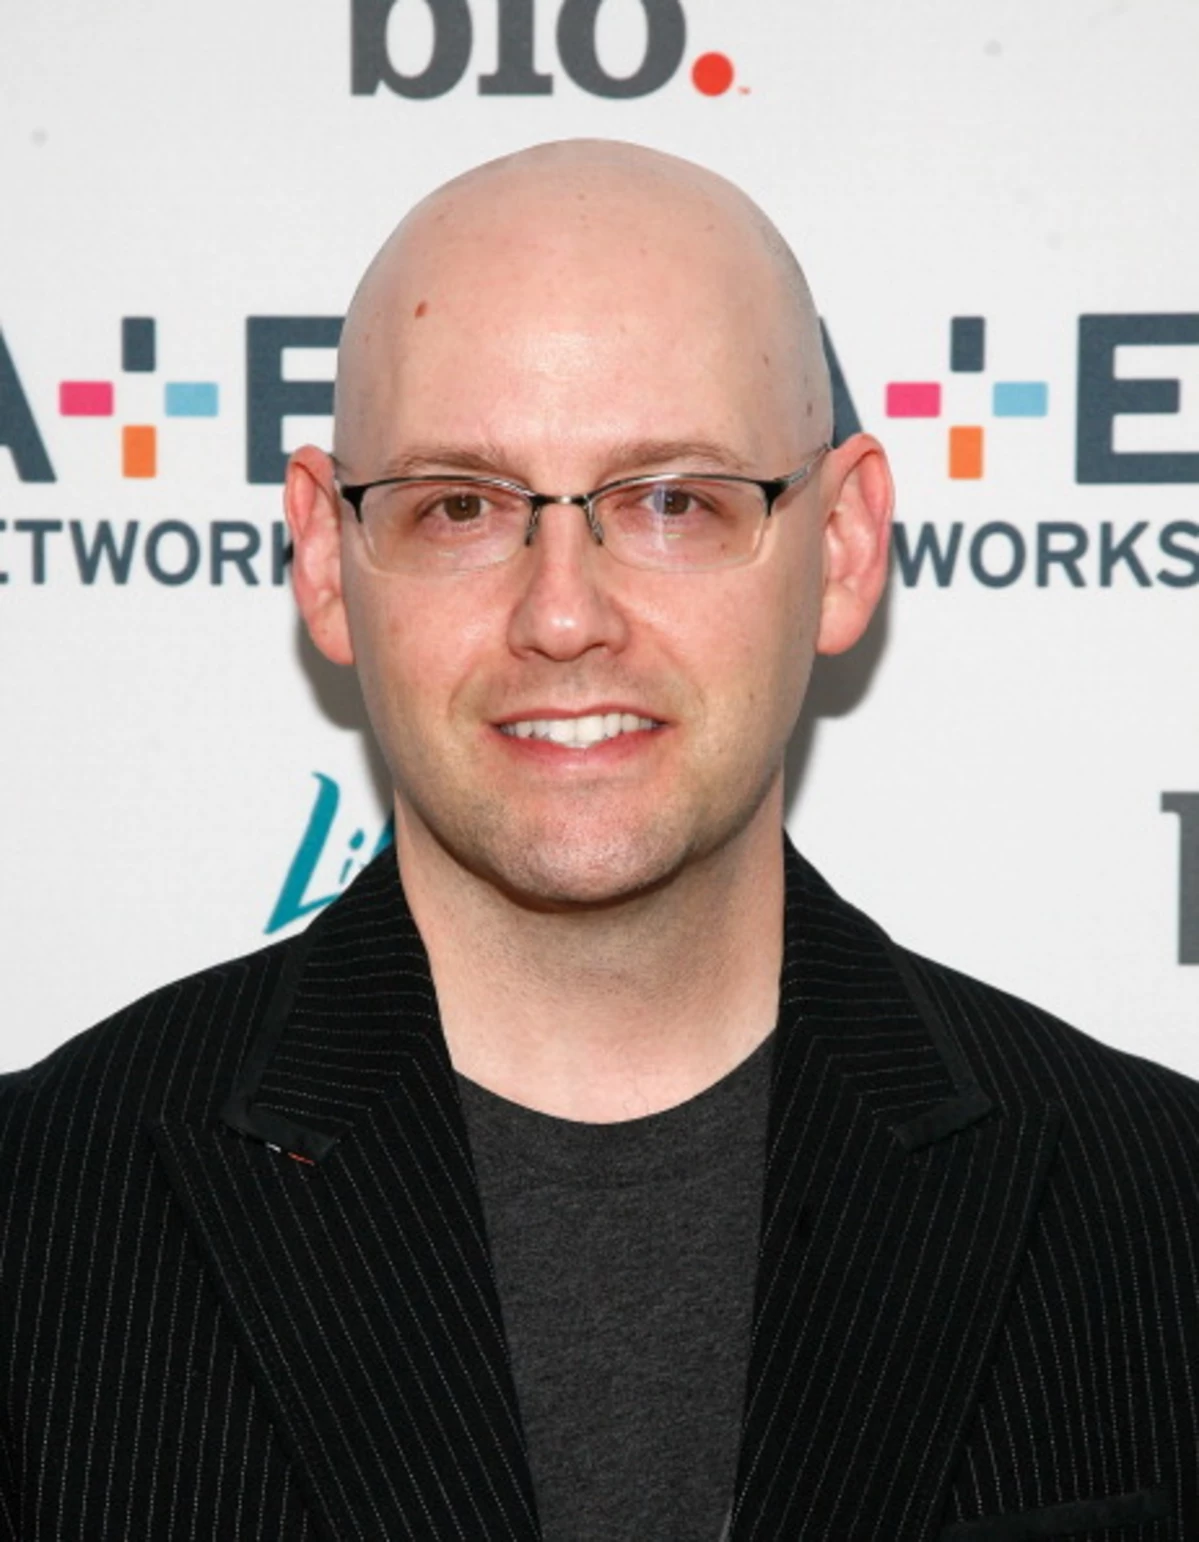 Interview with Author Brad Meltzer about History Decoded